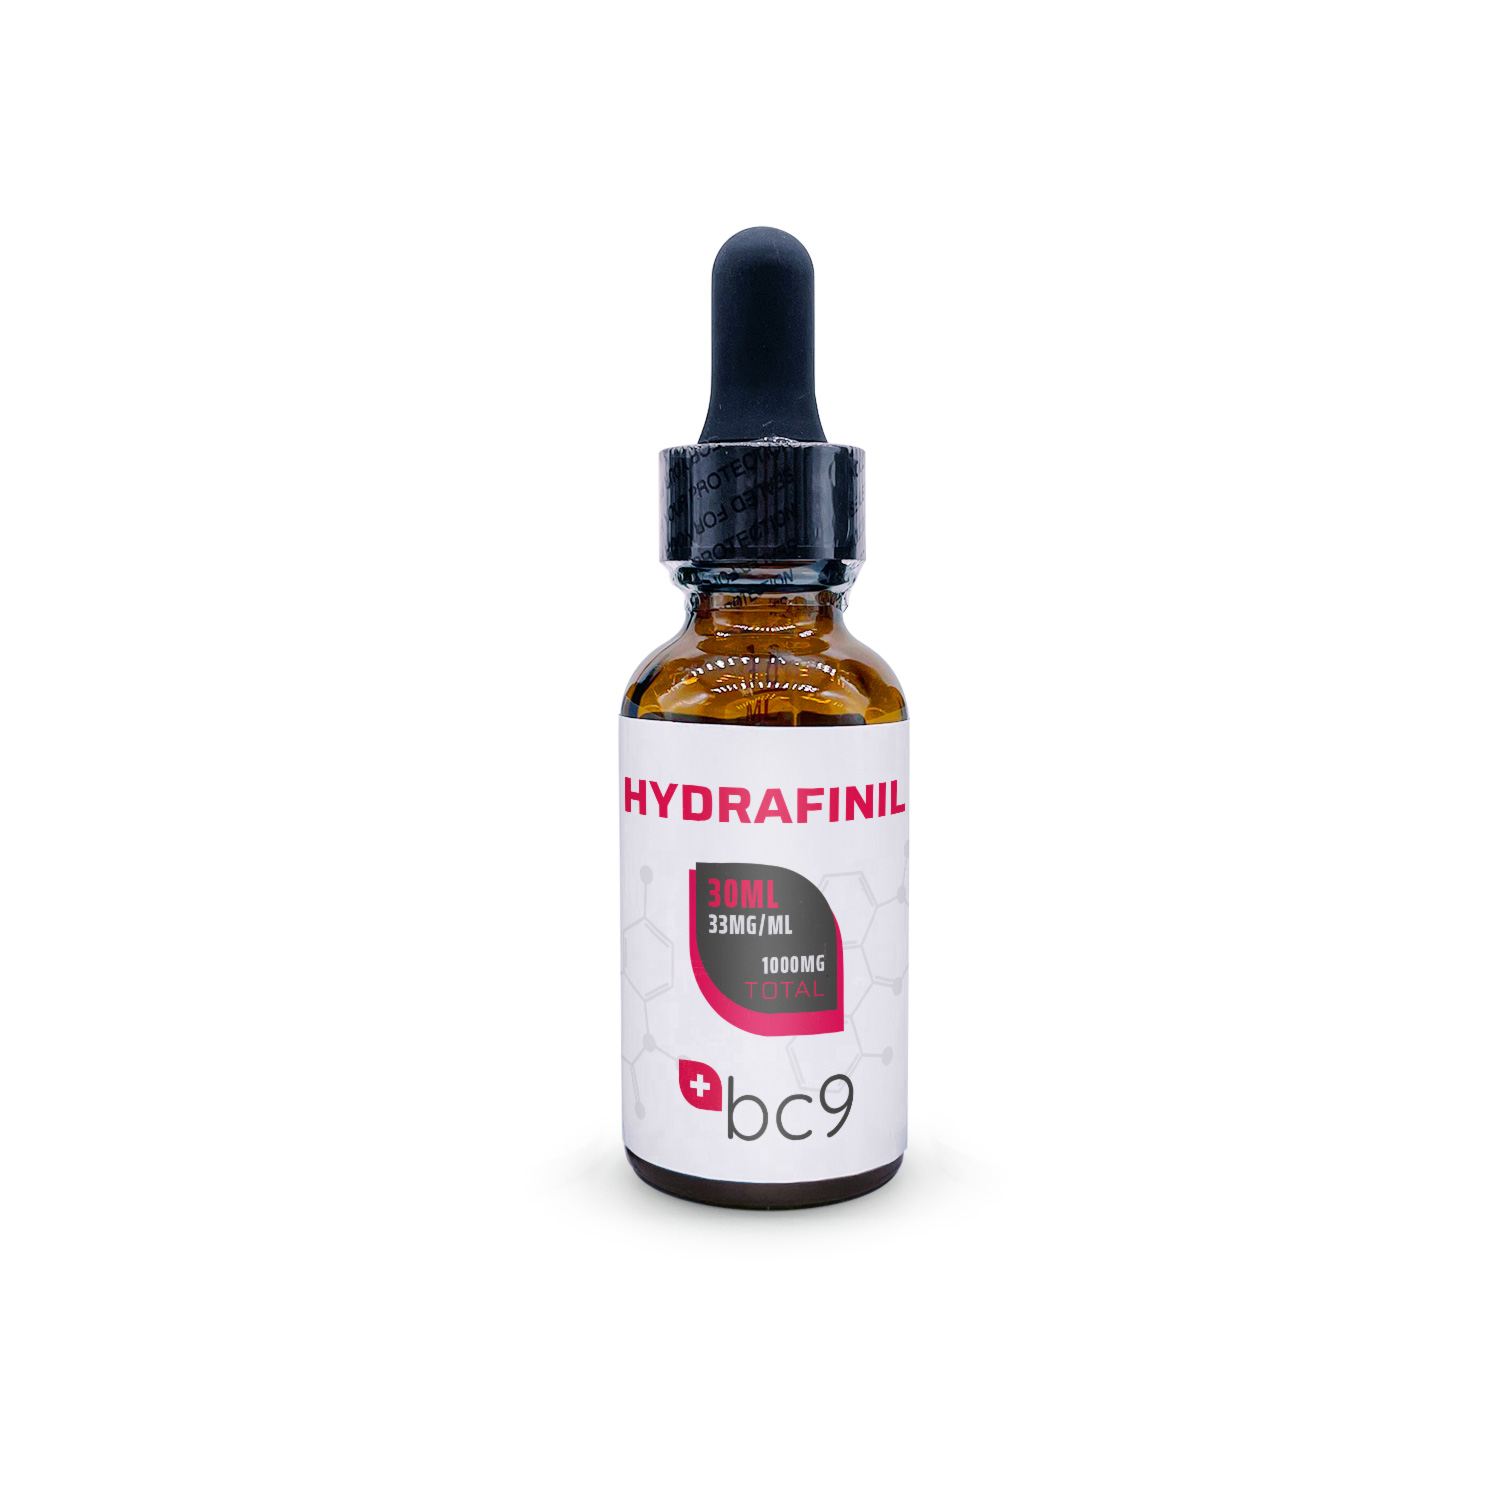 Hydrafinil Liquid For Sale | 3rd Party Tested | BC9.org